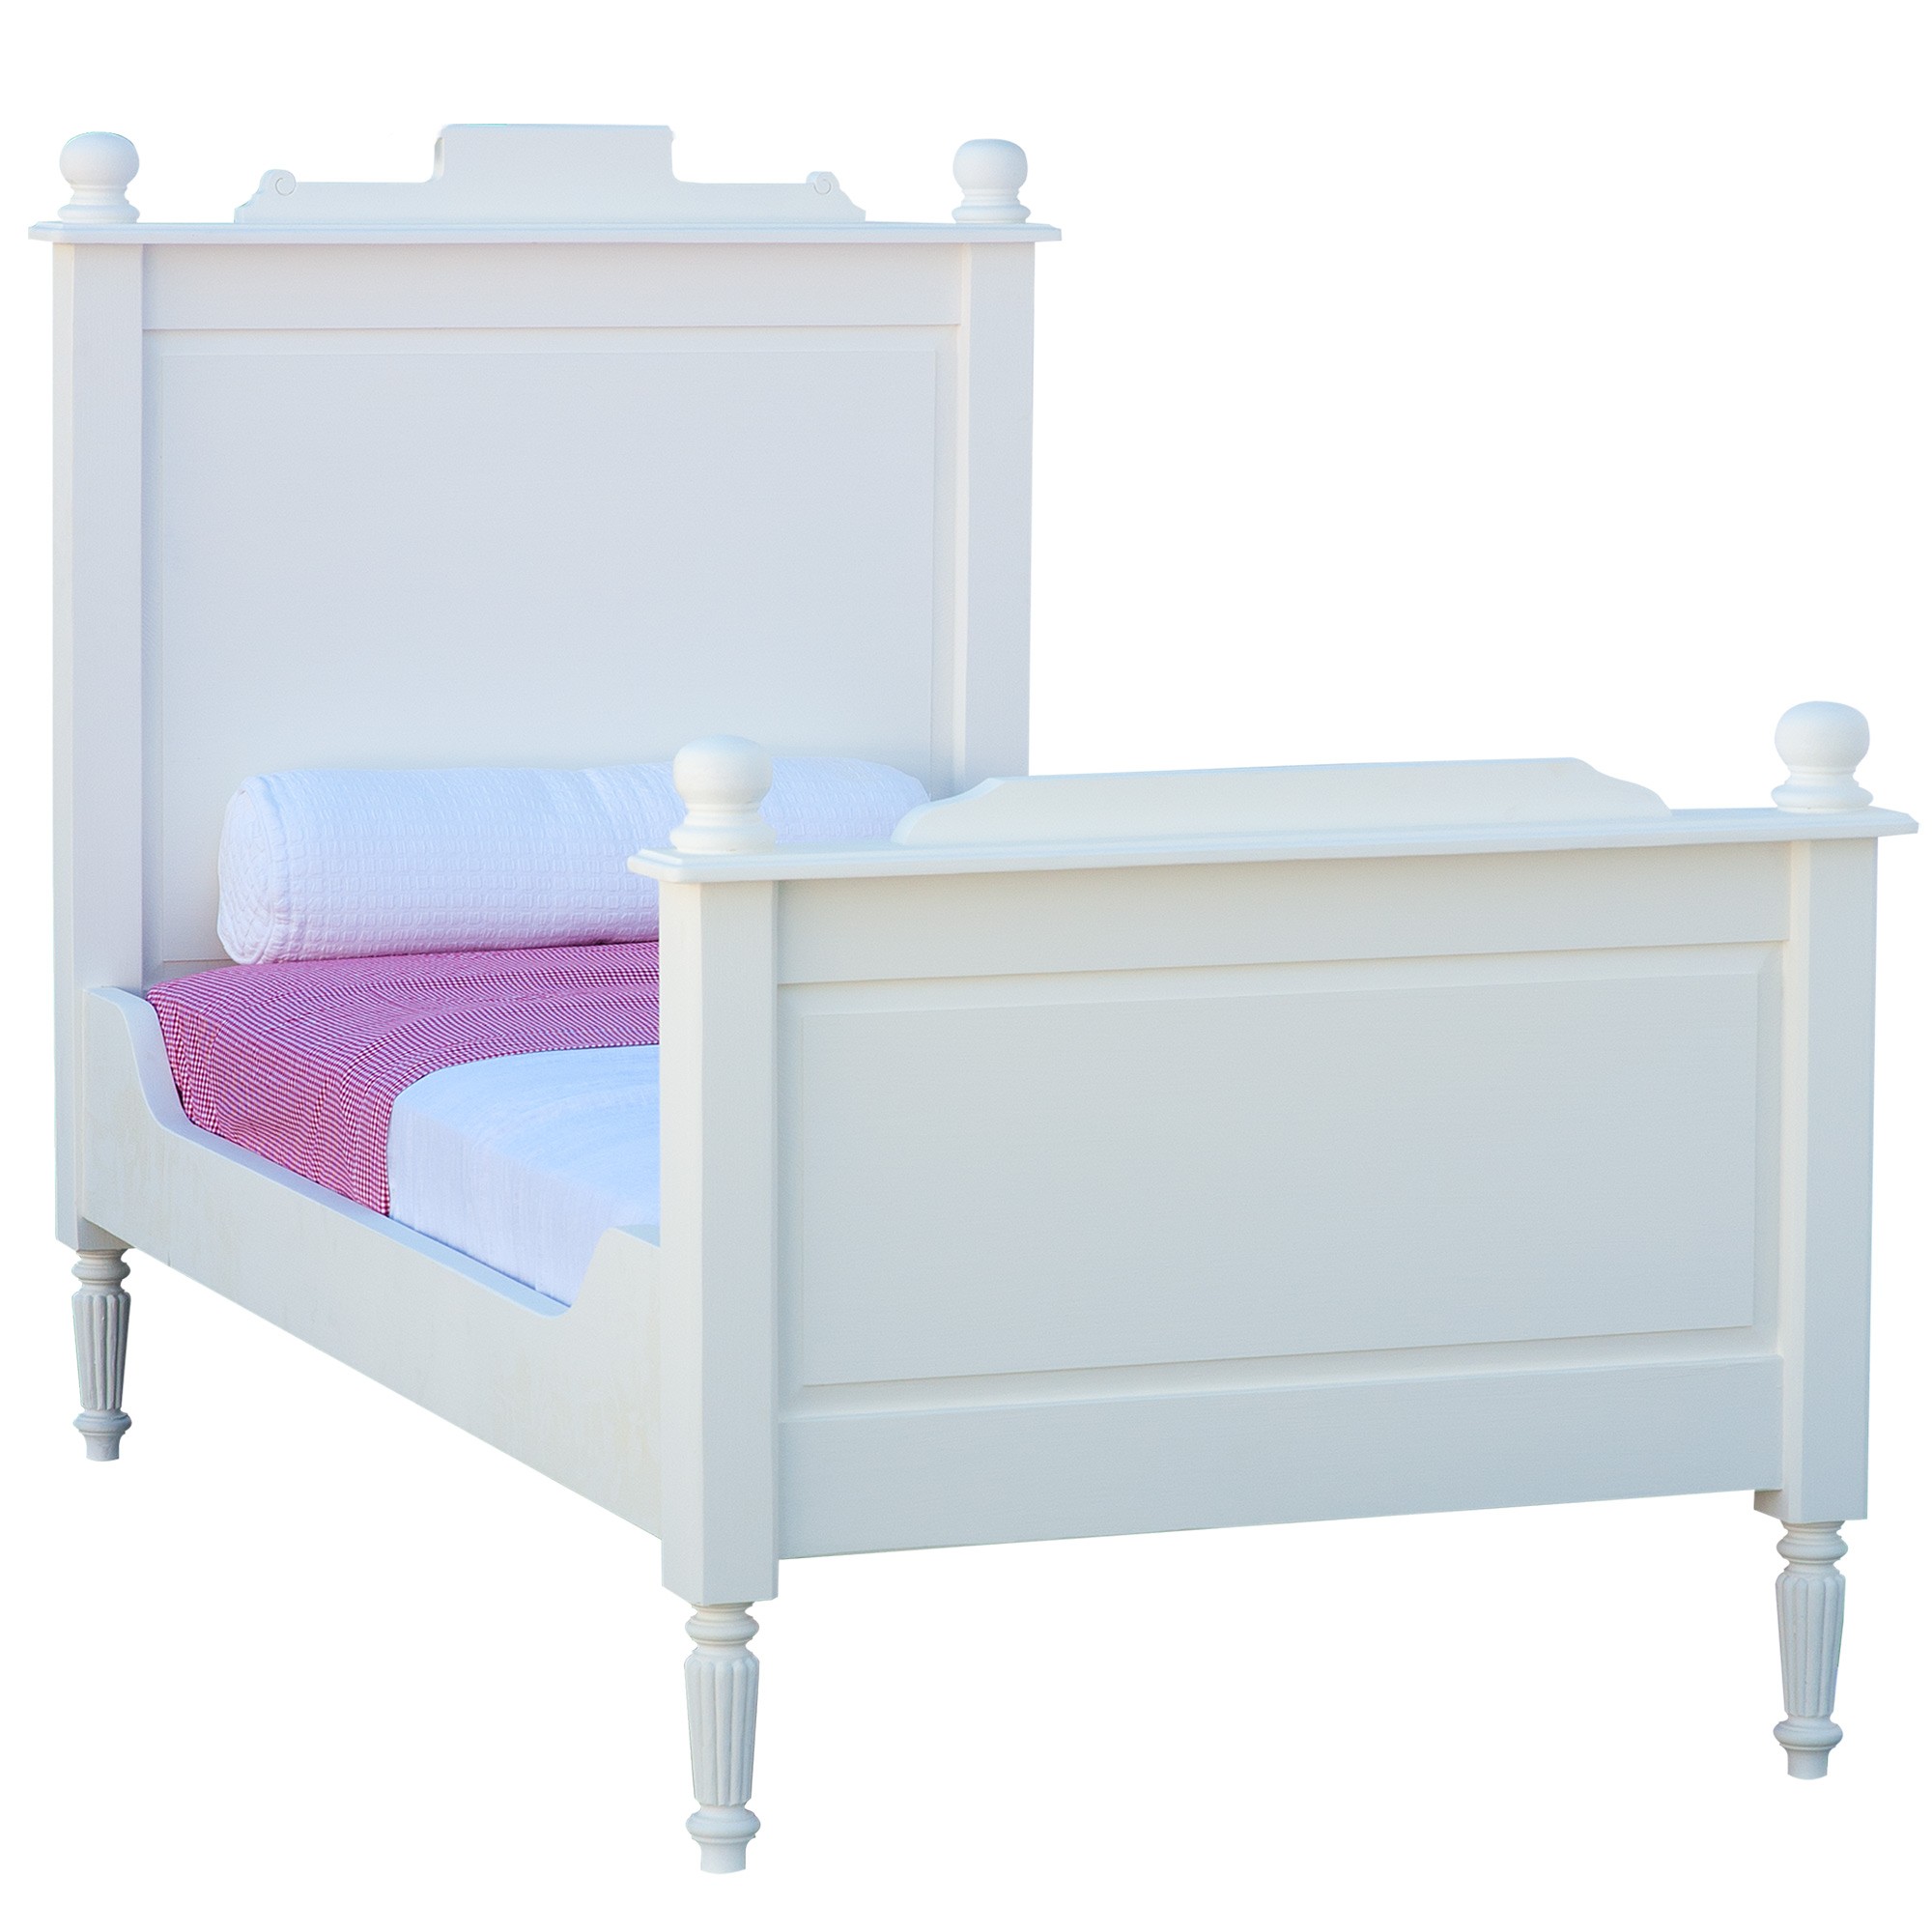 Little Farm Child's Bed by The Beautiful Bed Company